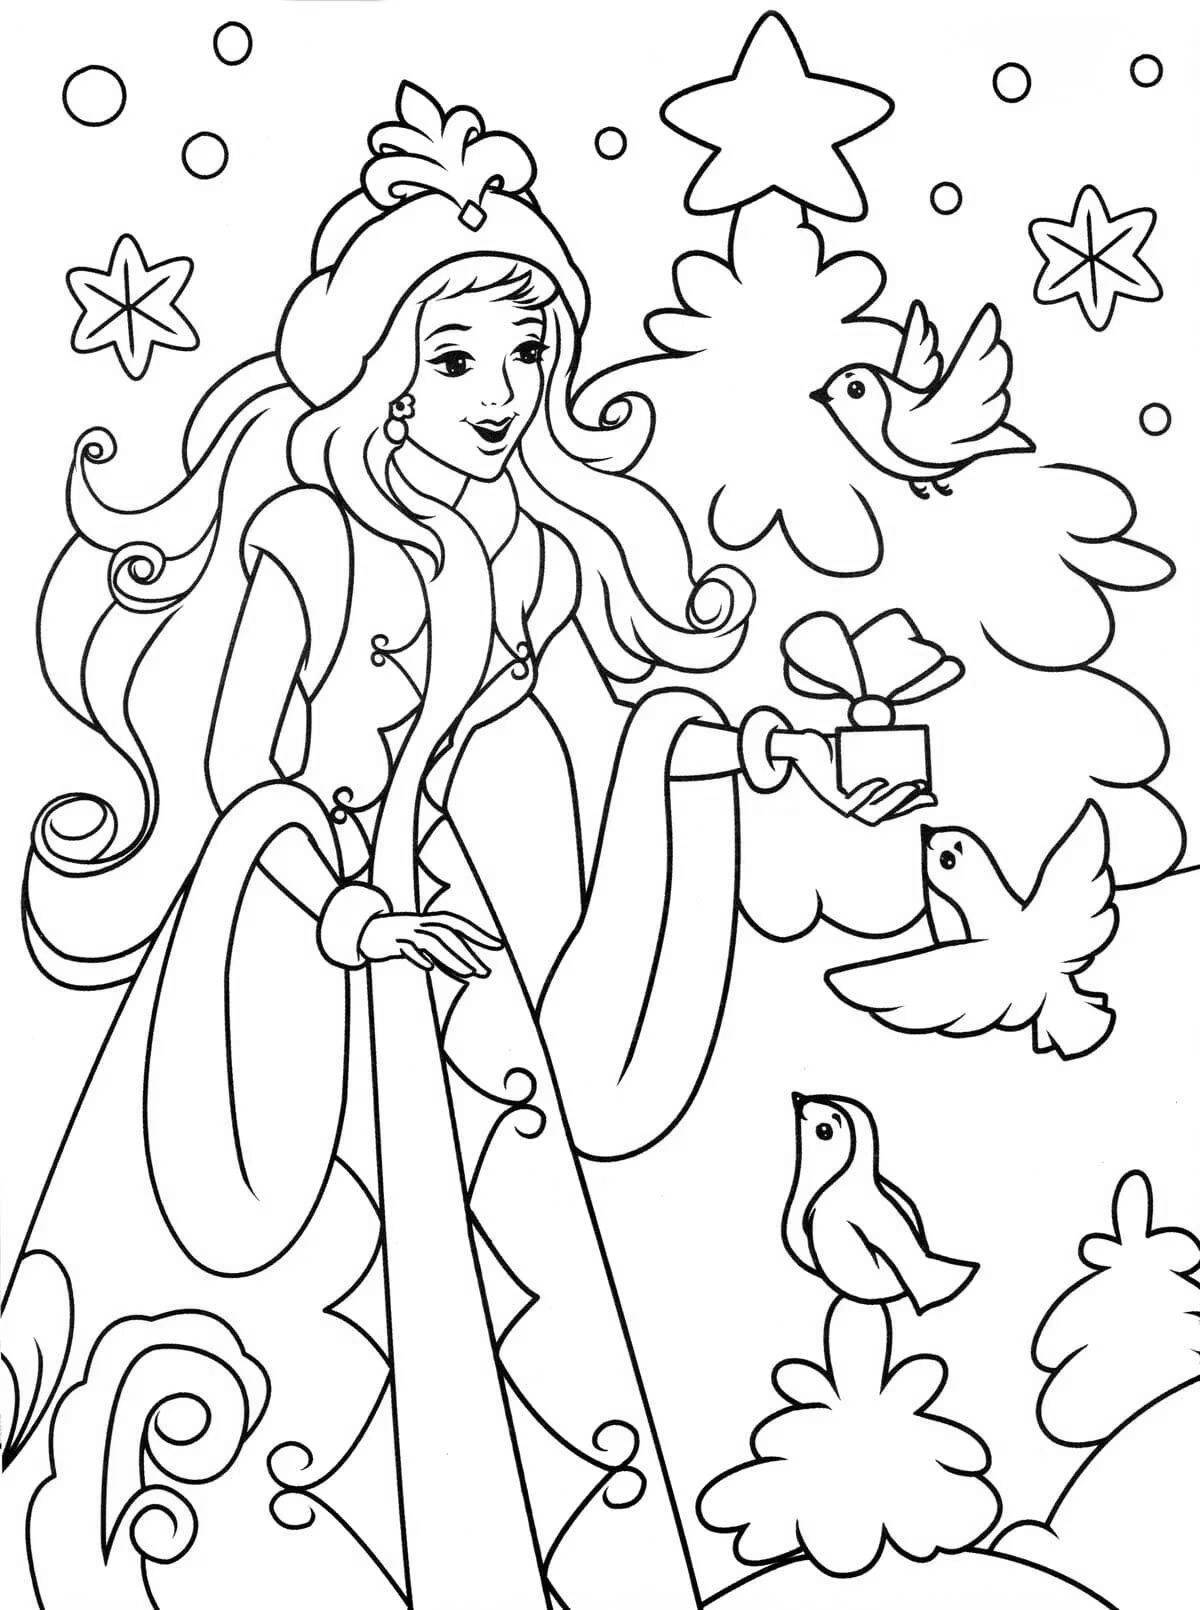 Shiny winter coloring book for girls